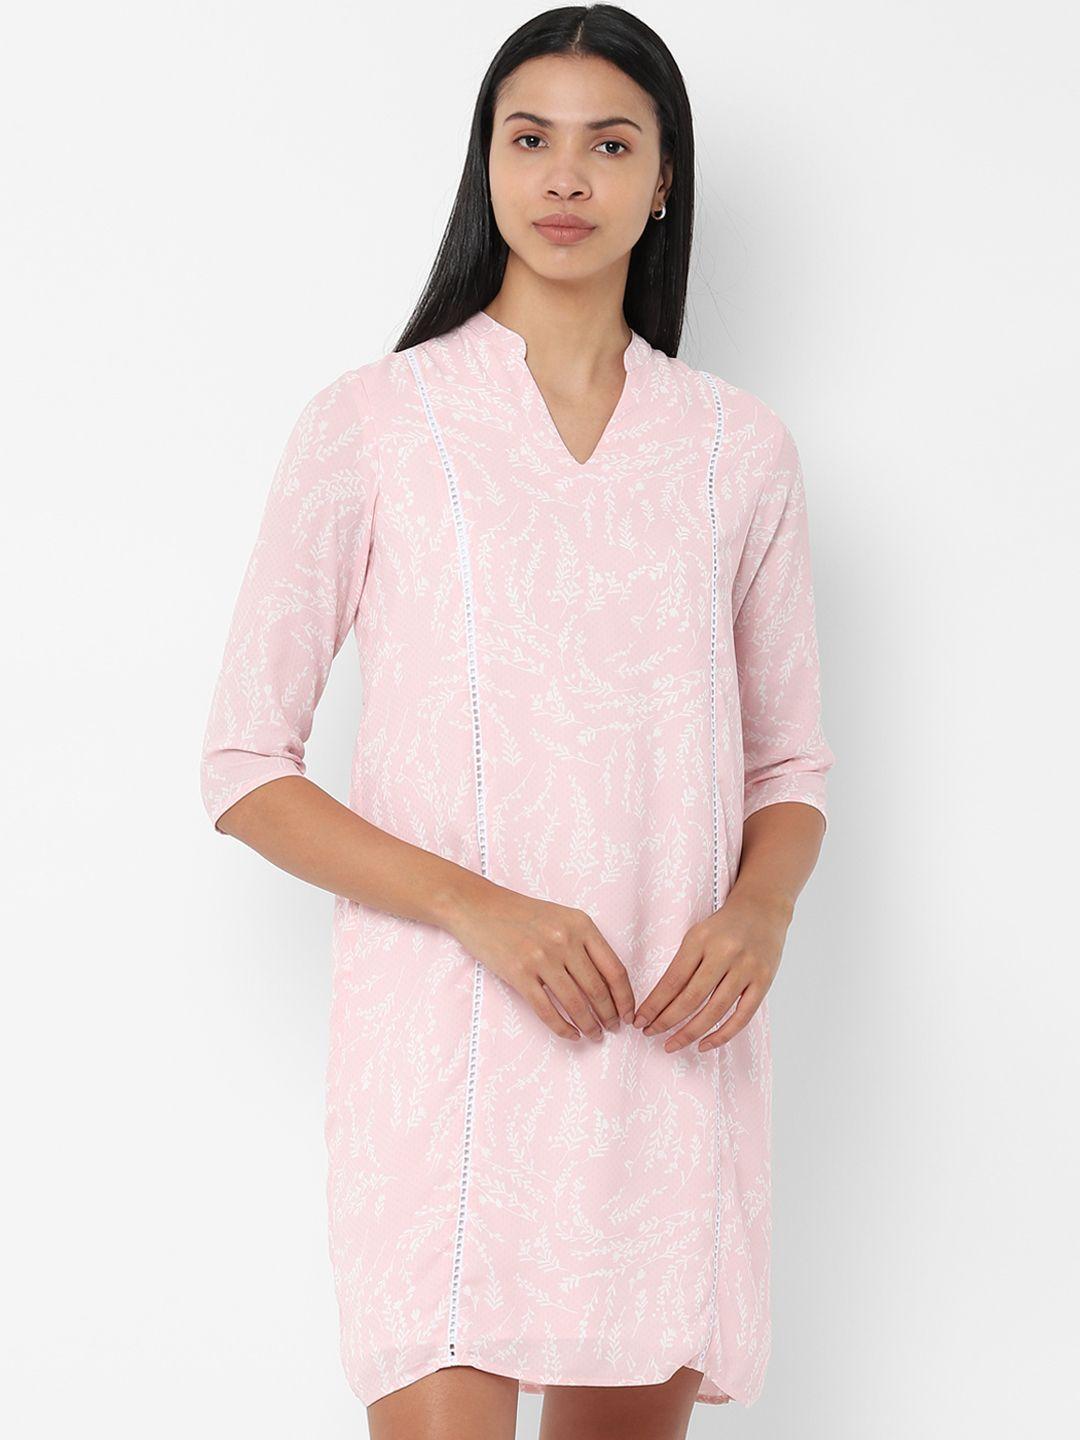 allen-solly-woman-women-pink-&-white-floral-printed-a-line-dress